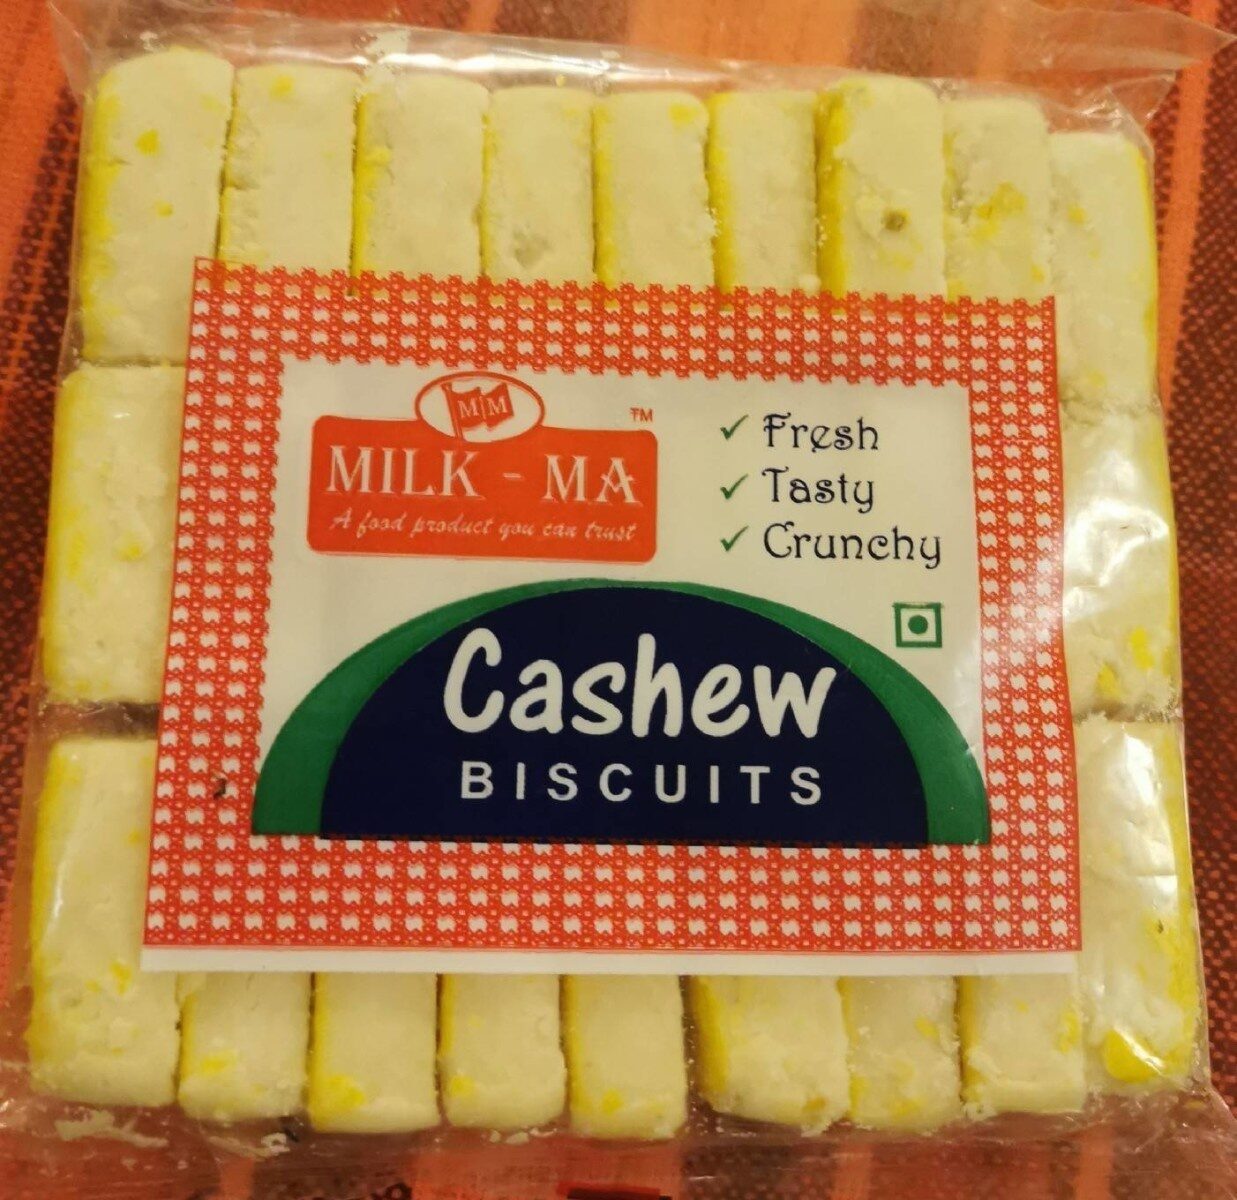 Cashew biscuits - Product